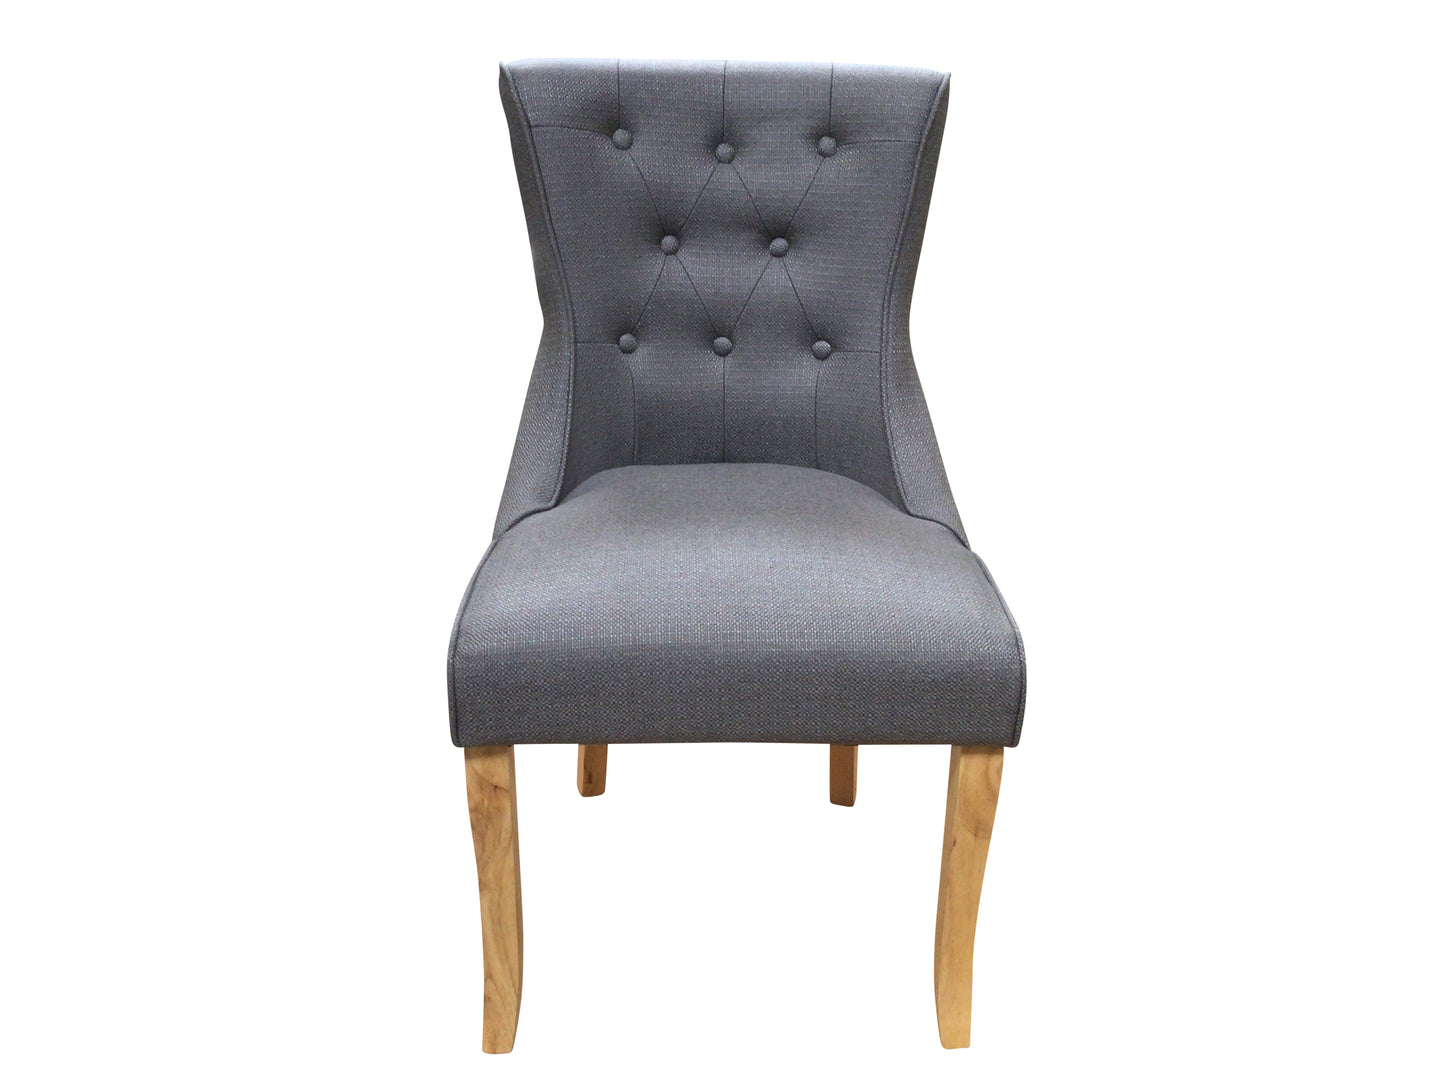 Kingston Cement Grey Linen Dining Chair